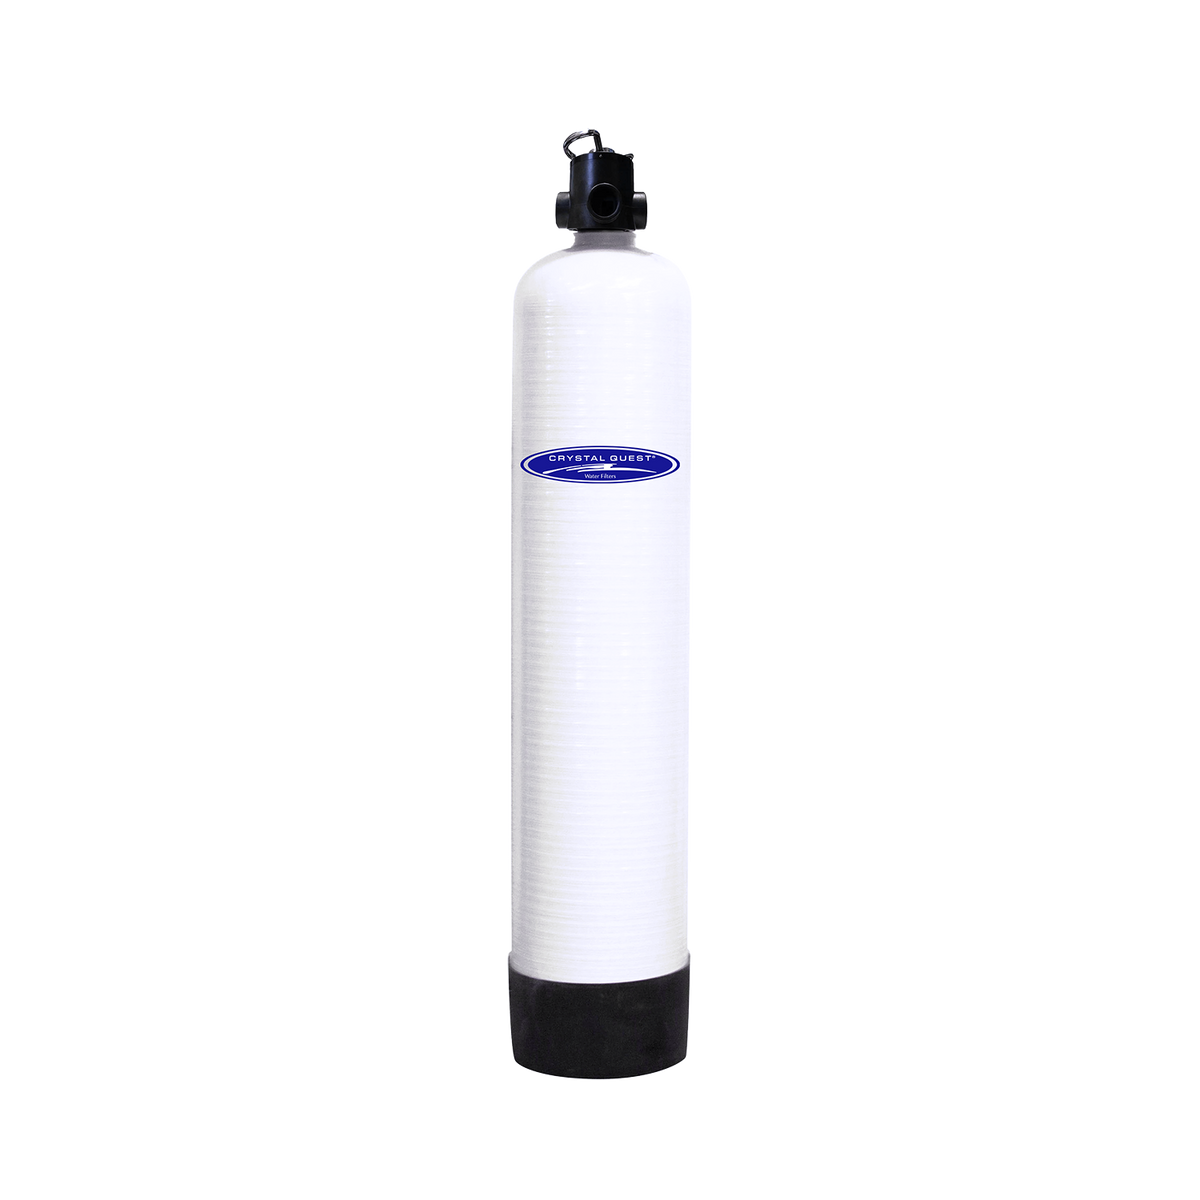 15 GPM / Manual (Downflow w/ Backwash) Granular Activated Carbon Water Filtration System - Commercial - Crystal Quest